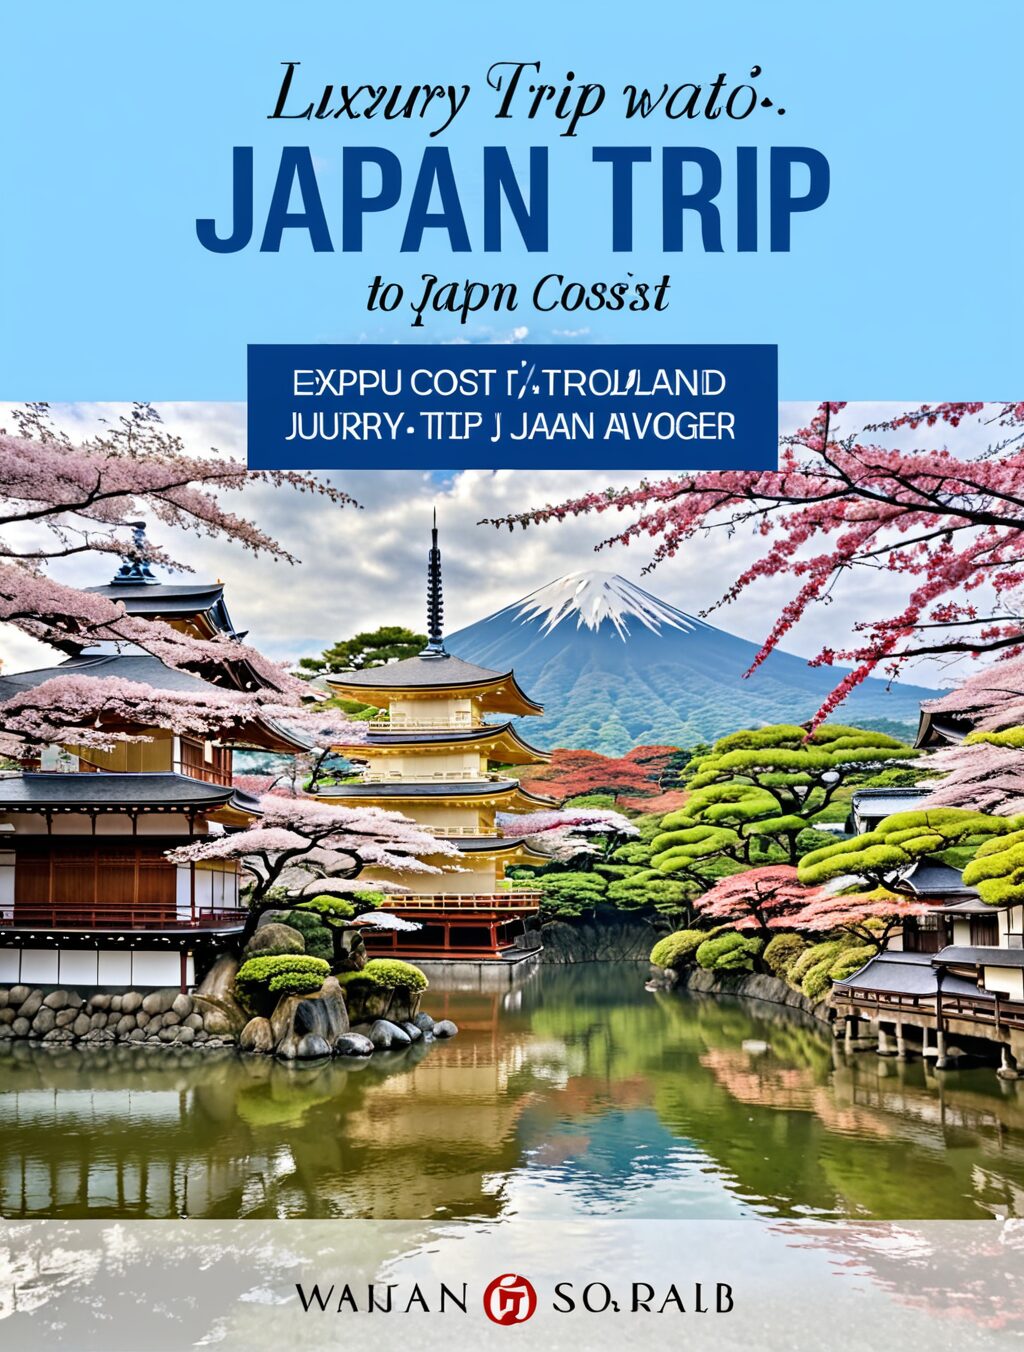 luxury trip to japan cost